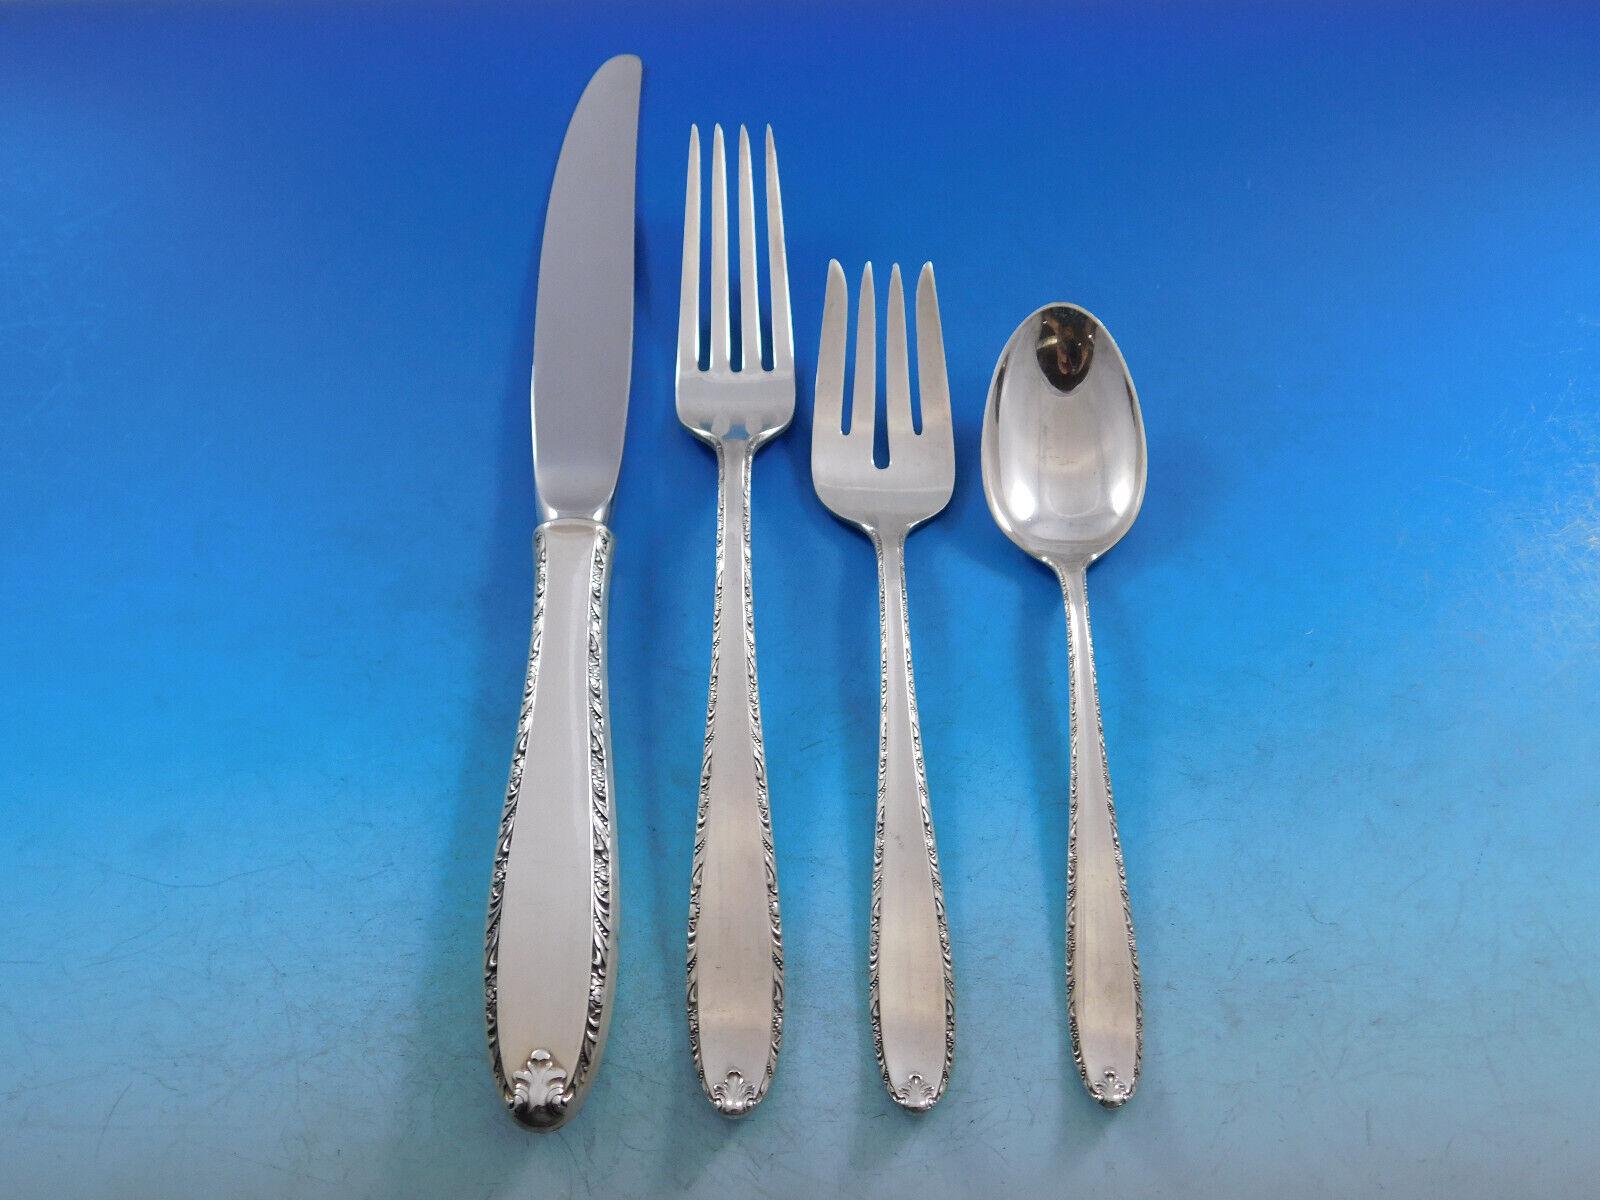 Dinner Size Southern Charm by Alvin c1947 sterling silver Flatware set, 63 pieces. This set includes:

12 Dinner Size Knives, 9 5/8